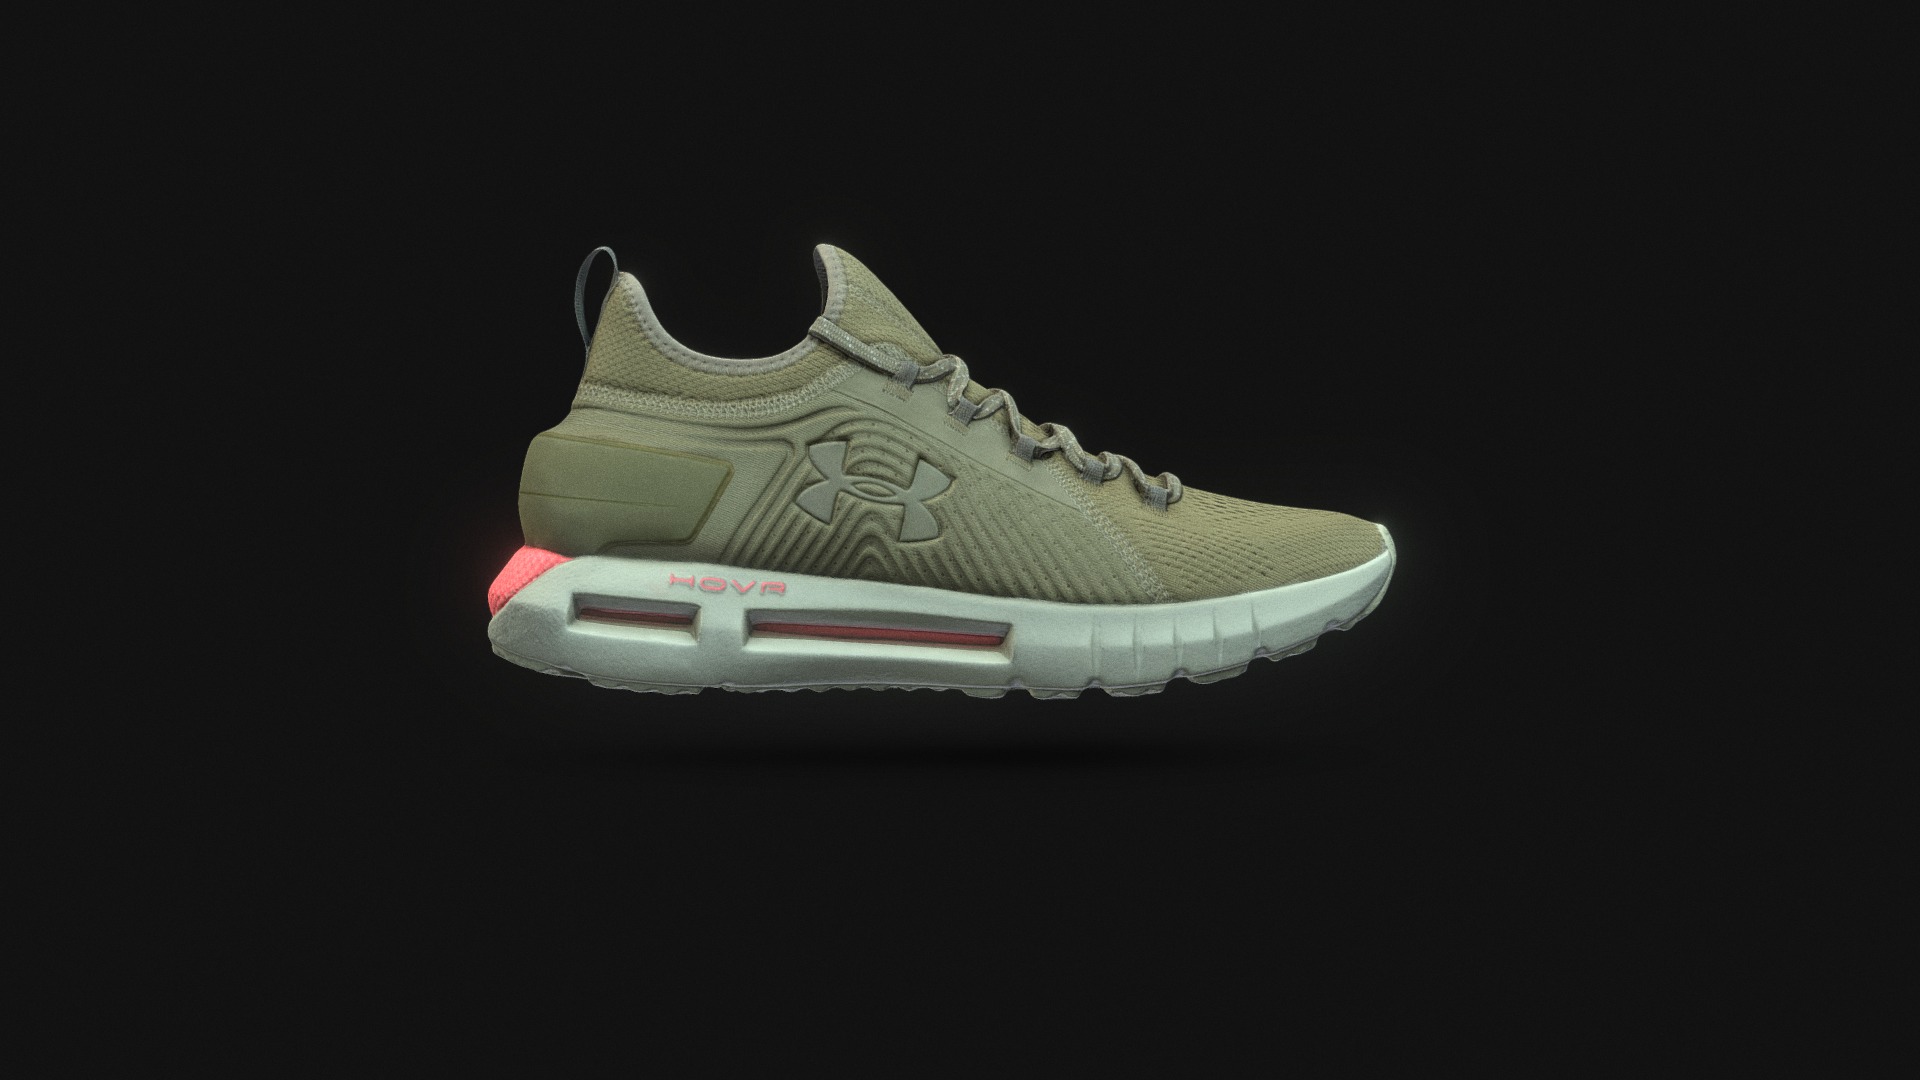 3D model Under Armour HOVR - This is a 3D model of the Under Armour HOVR. The 3D model is about a shoe on a black background.